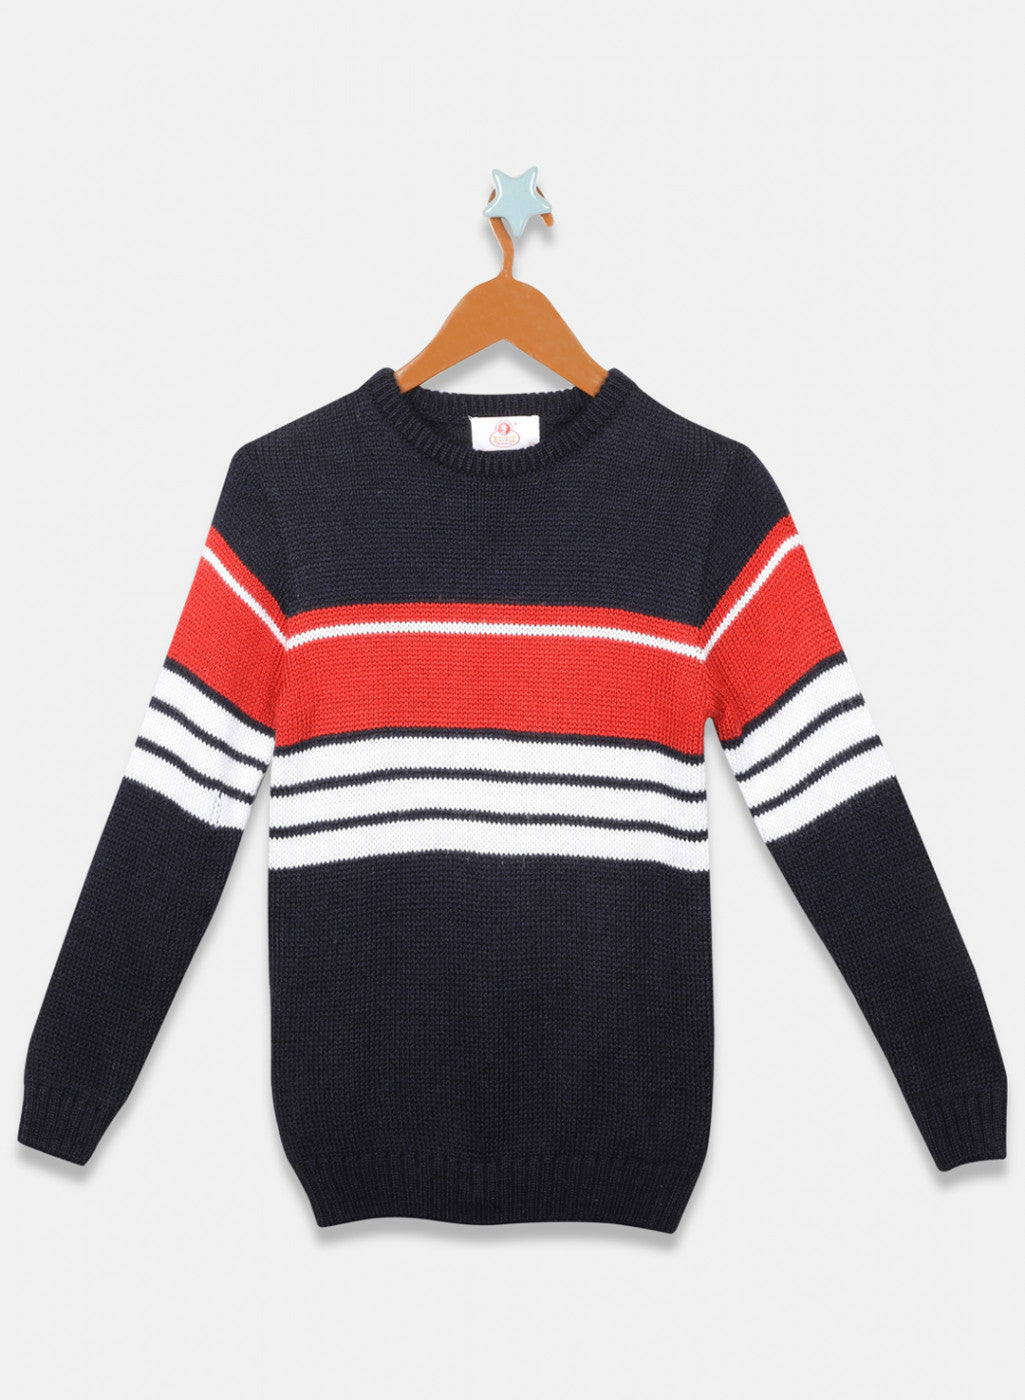 Oswal NAvy Multi Color Boys Pullover